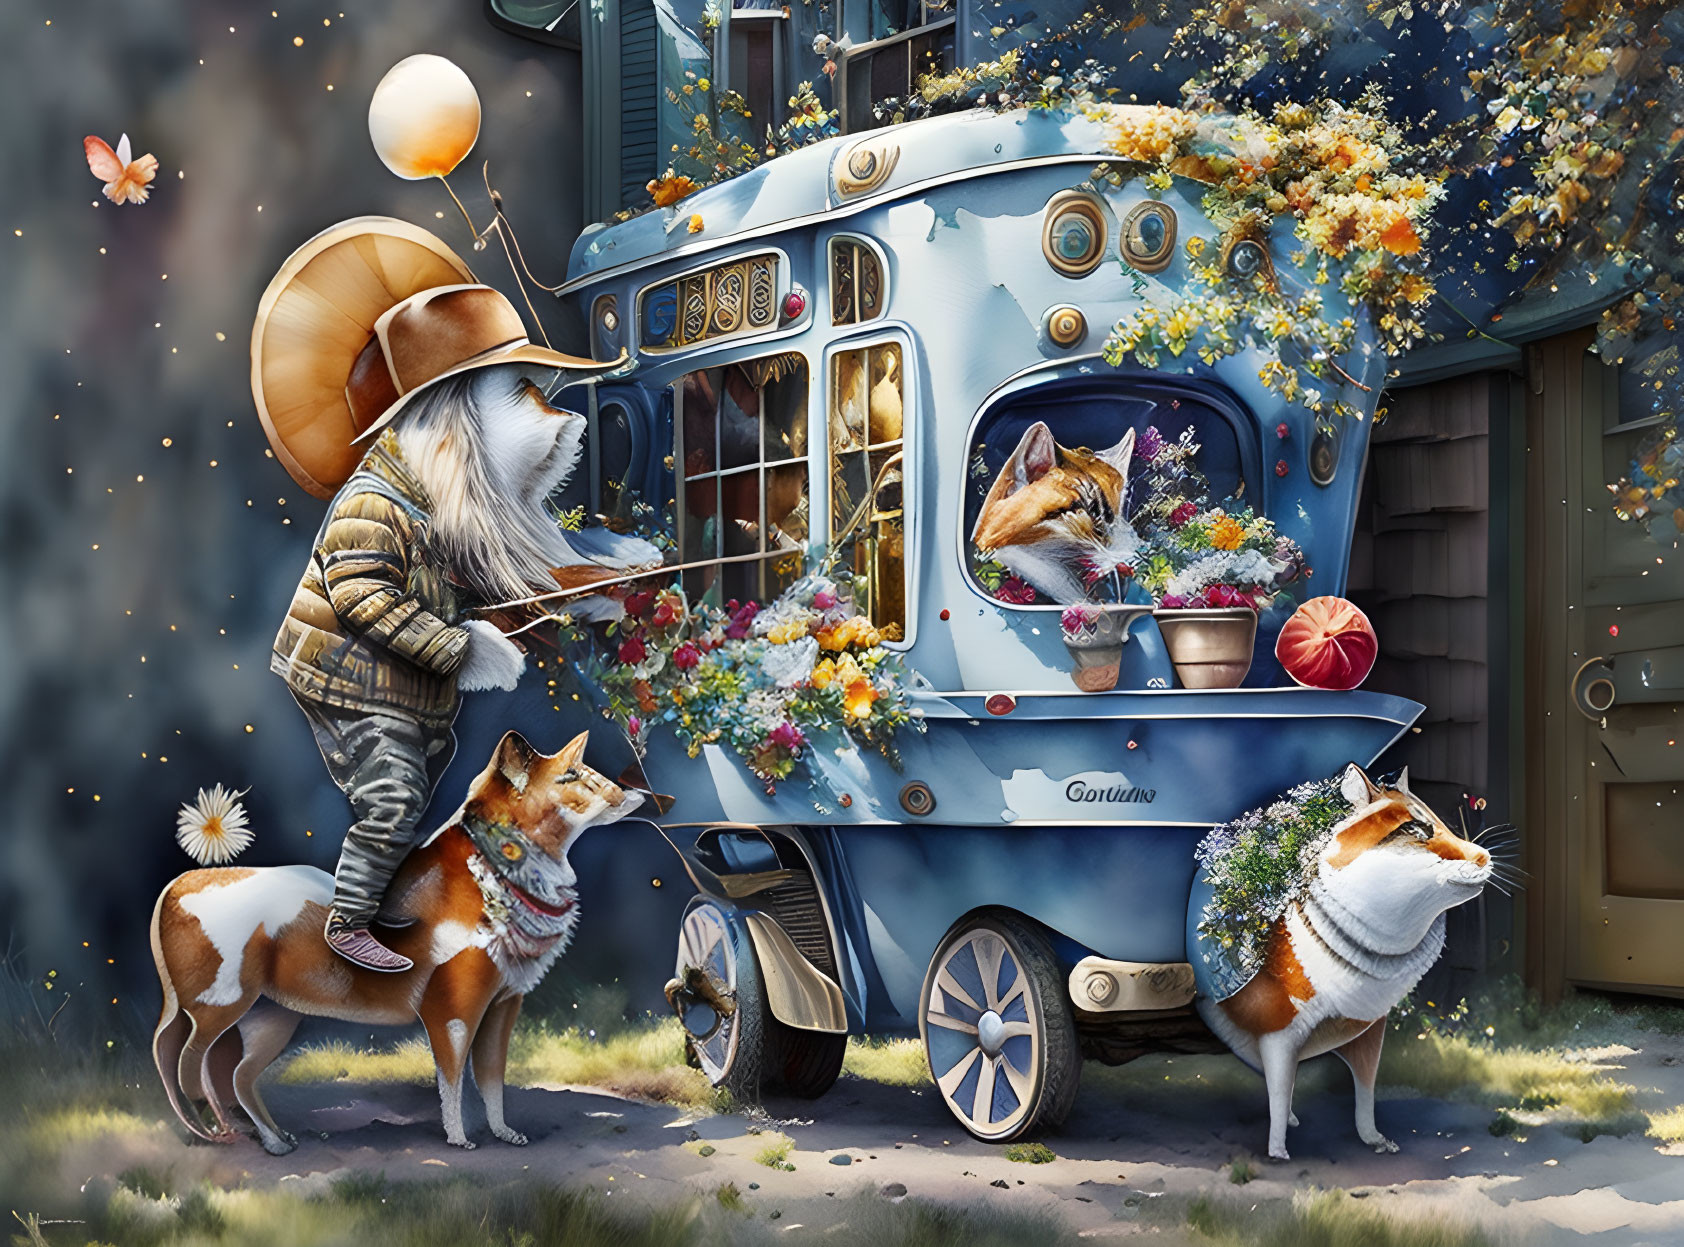 Anthropomorphic fox with hat and backpack meets two foxes in magical setting